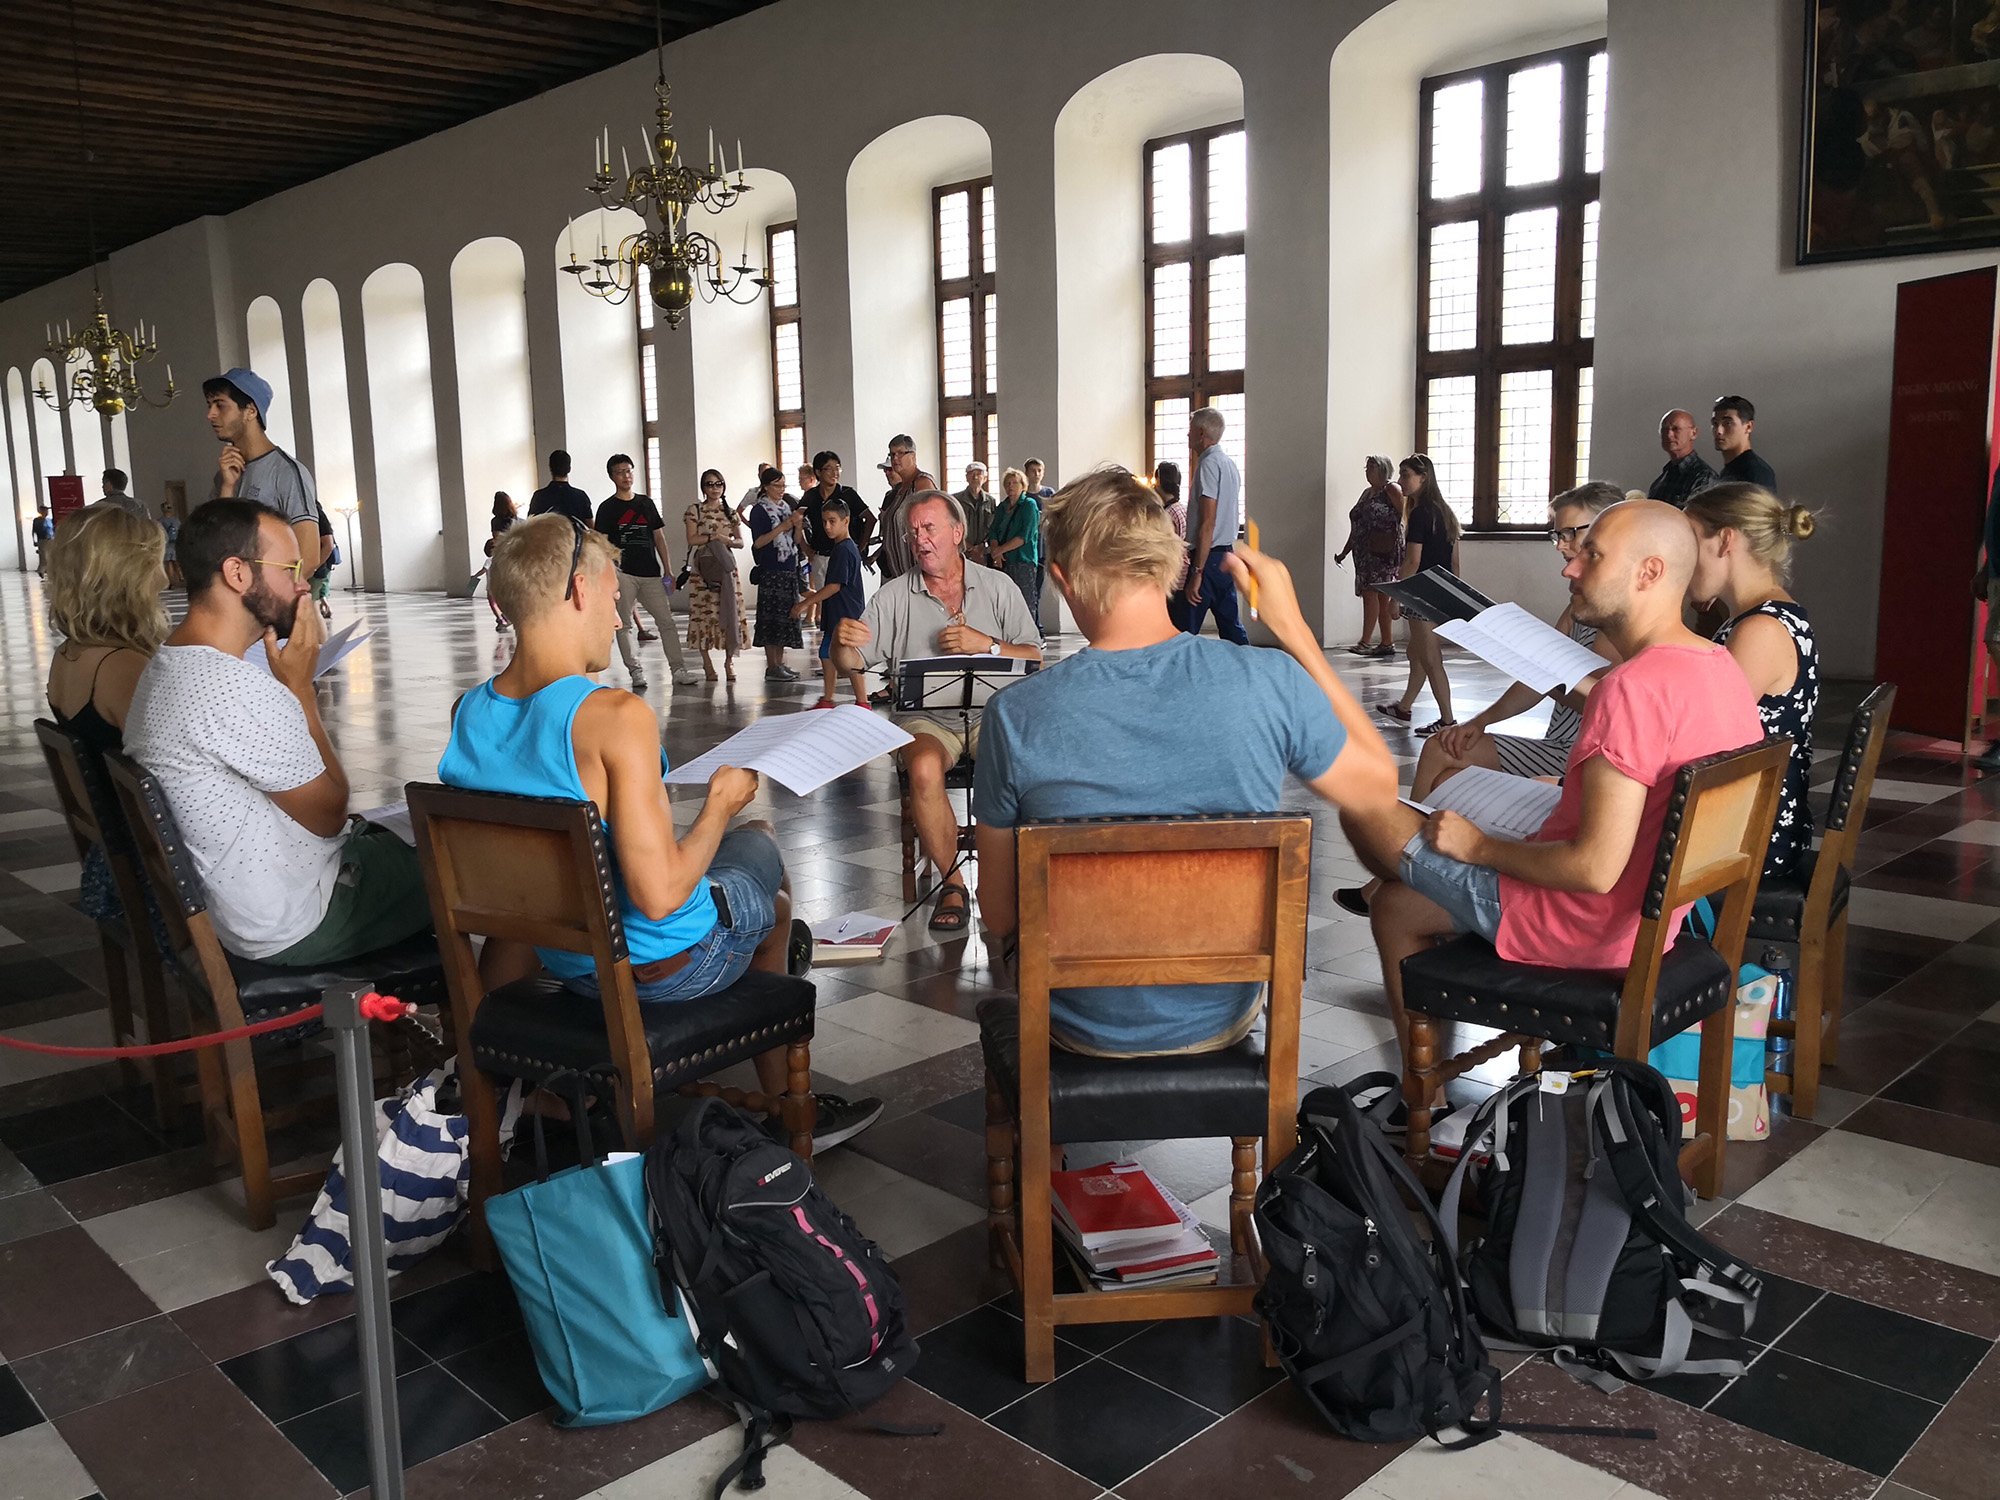 Musica Ficta is holding an open rehearsal in the Dance Hall at Kronborg Castle.